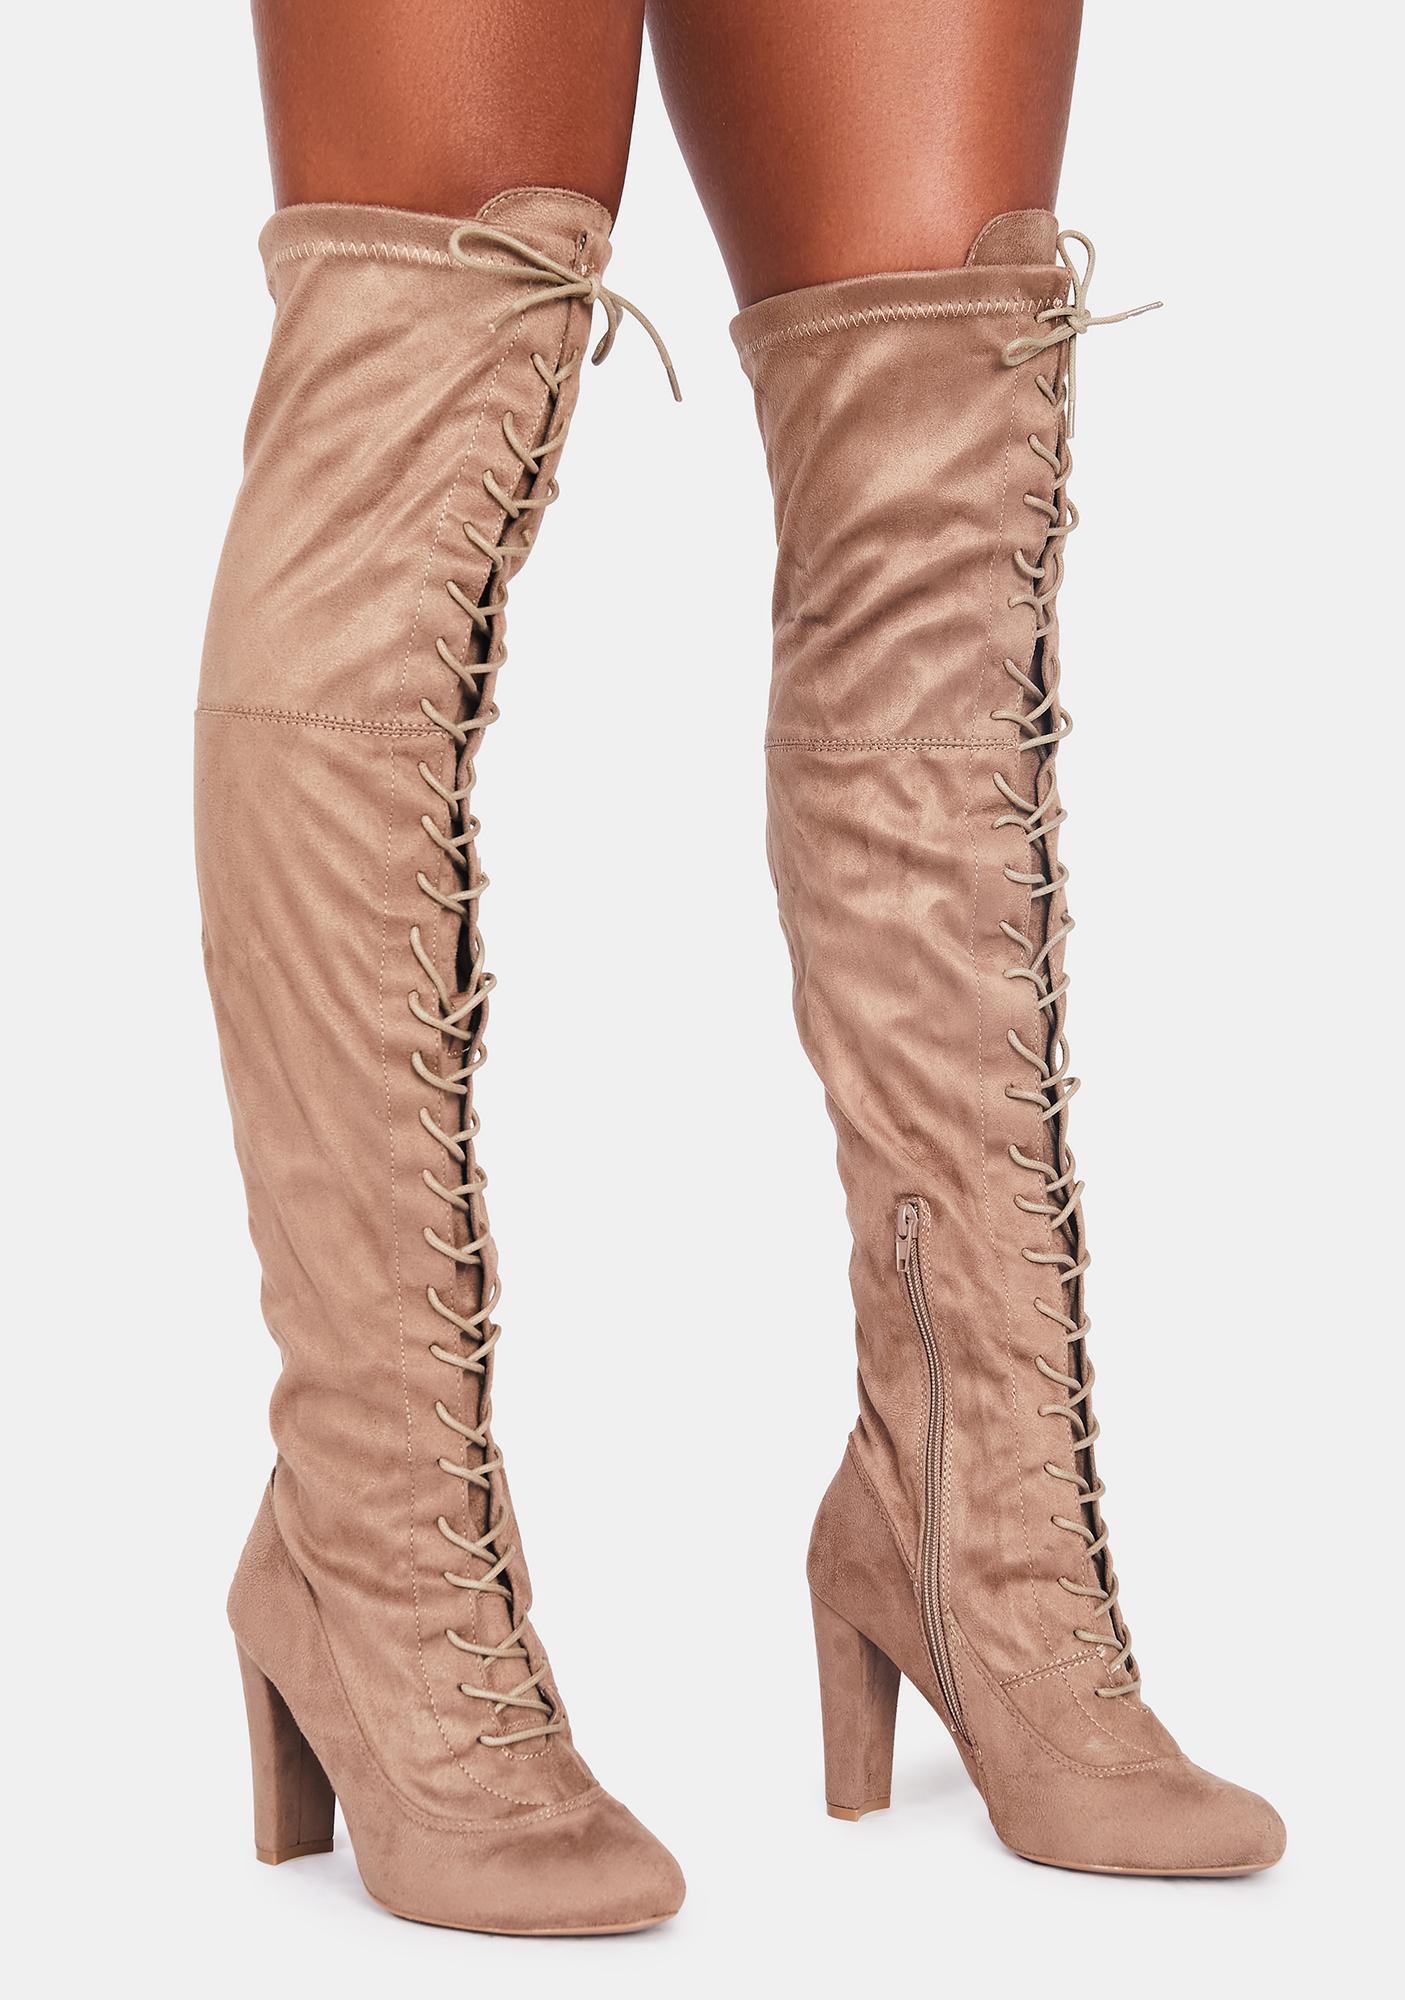 Vegan Suede Lace Up Thigh High Boots - Tan | Dolls Kill